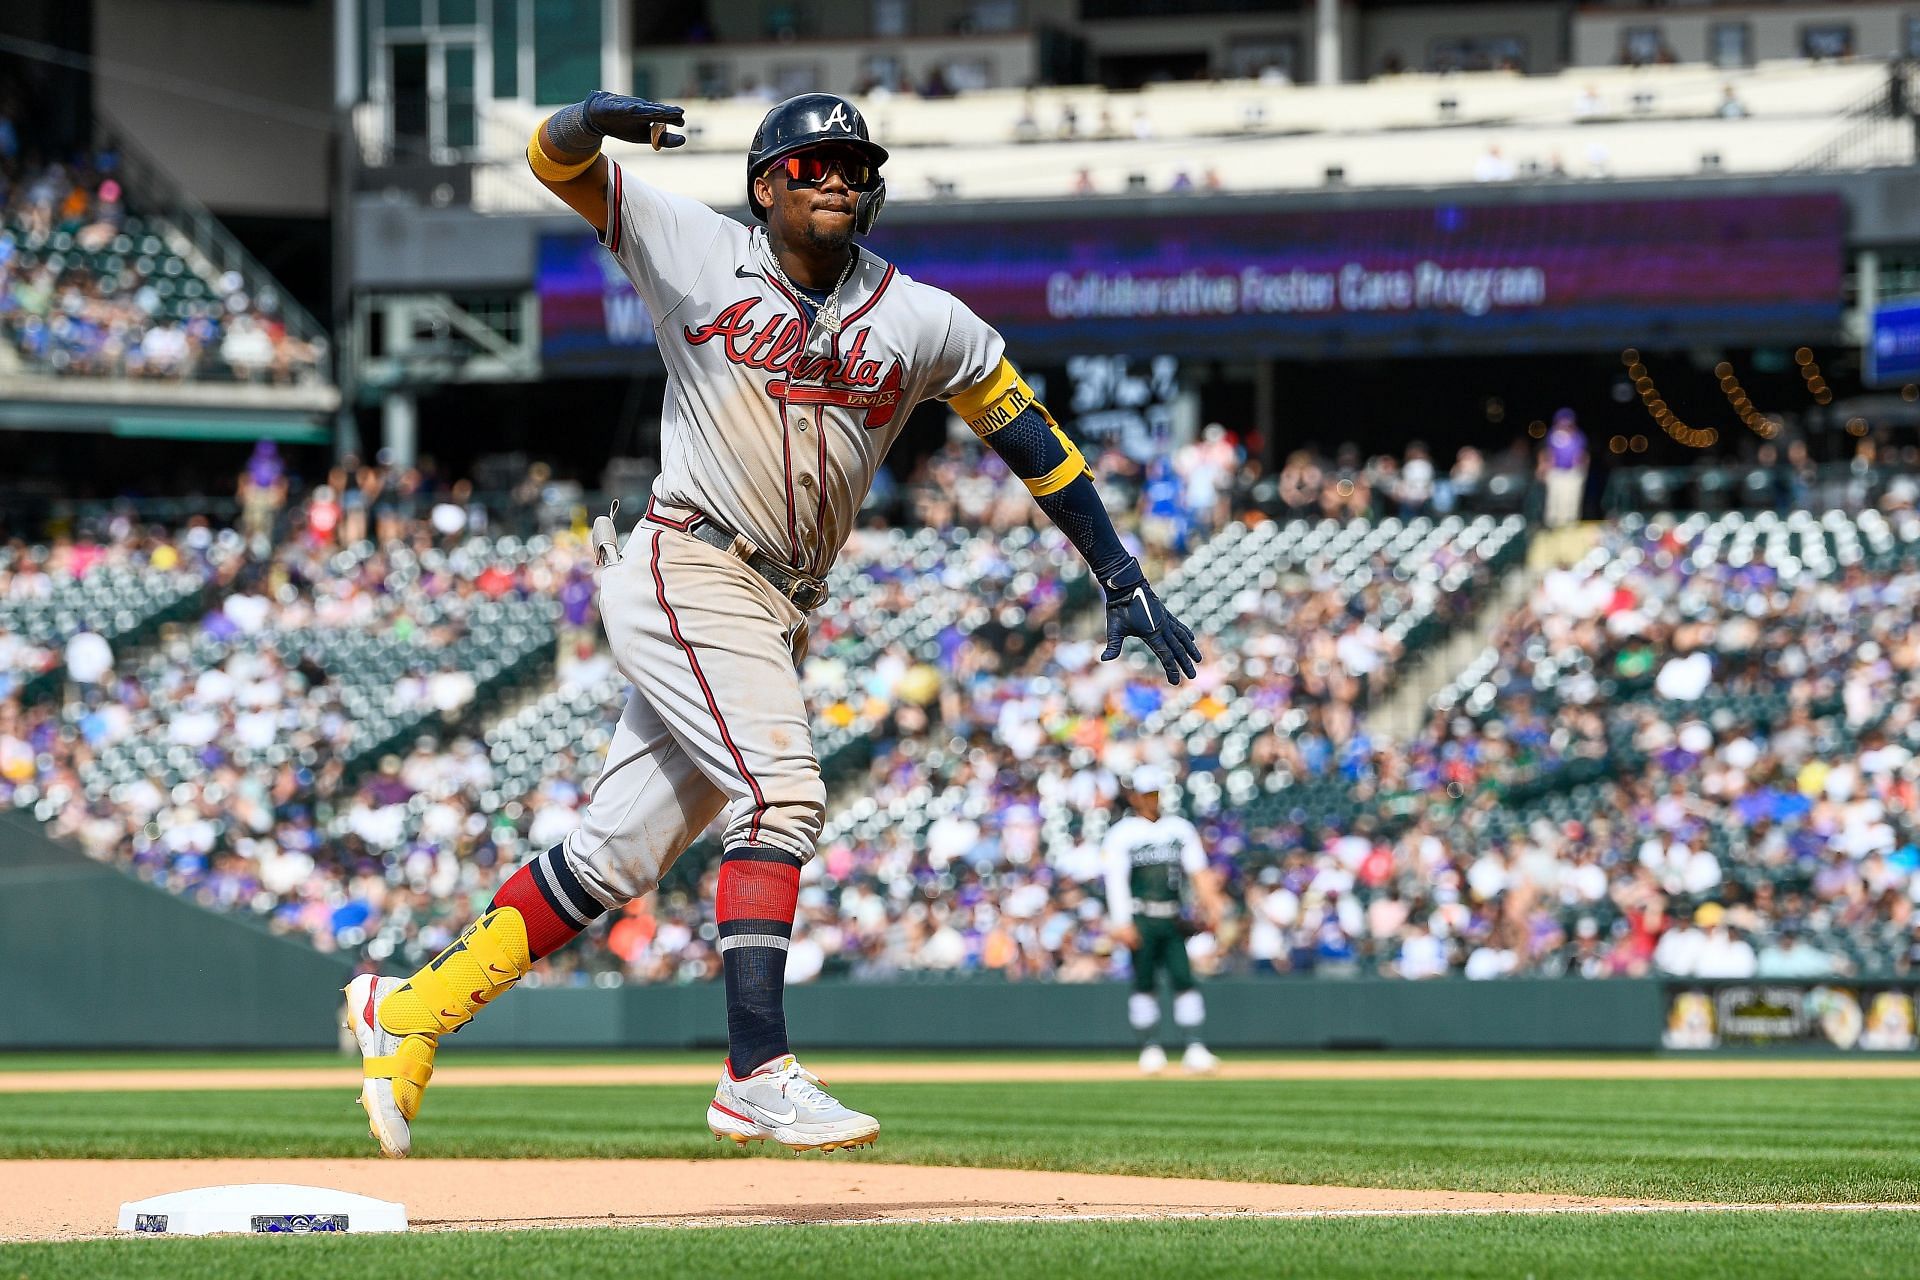 Ronald Acuna Jr. hit the game-winning home run in Colorado on Sunday.